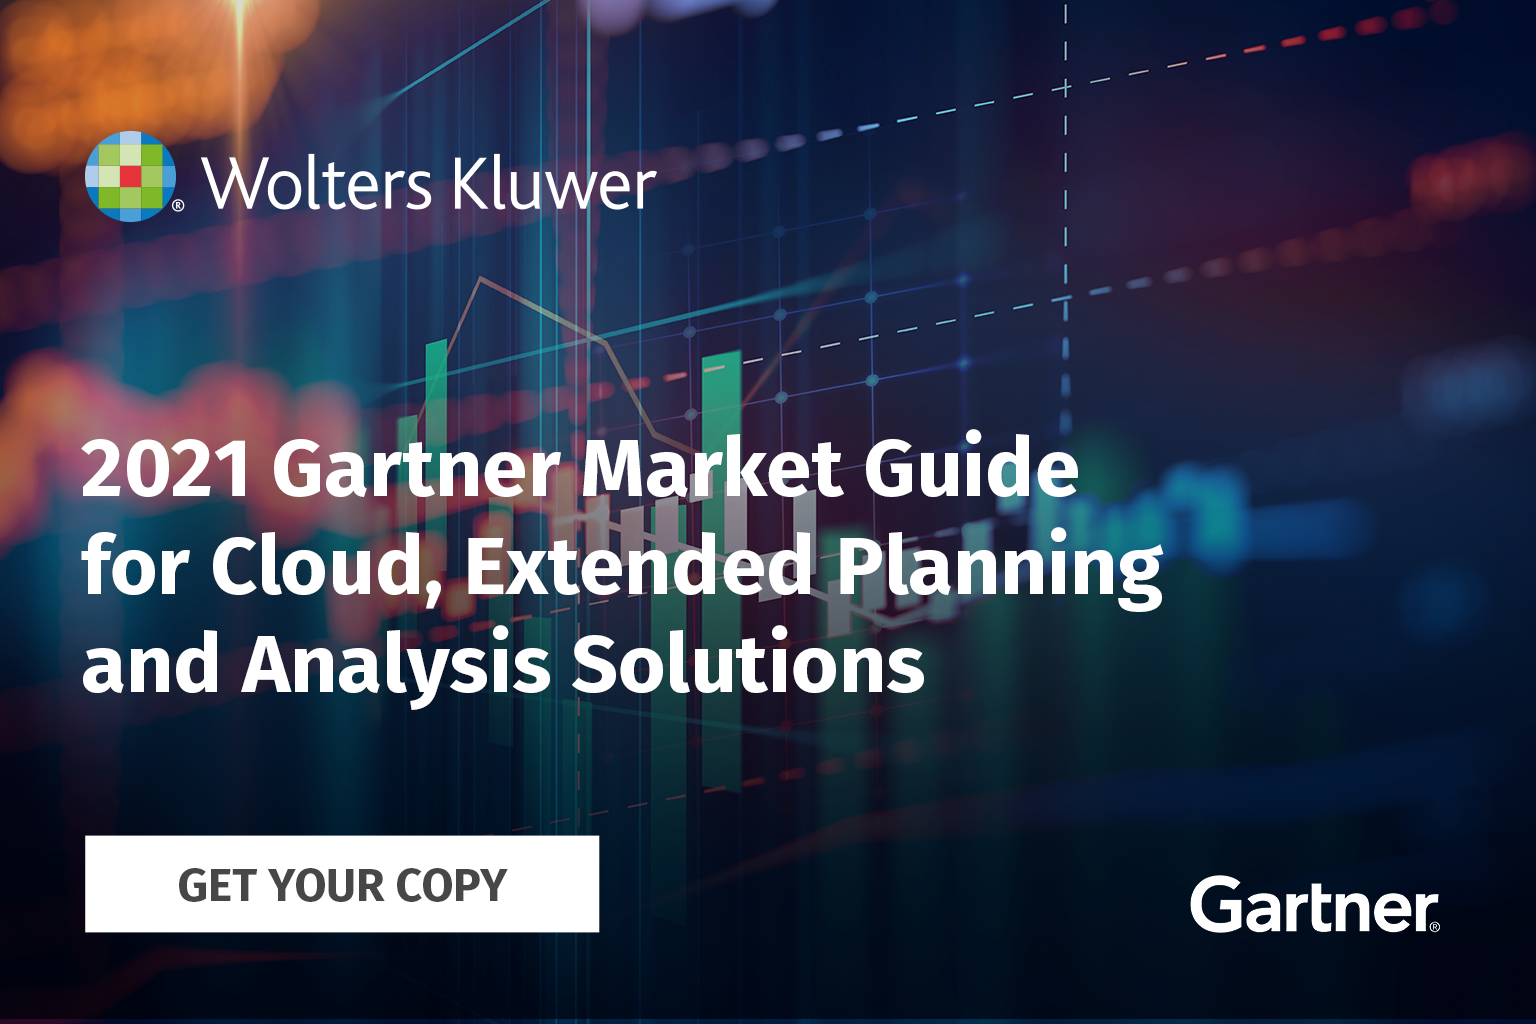 Cch Tagetik Recognized In The 2021 Gartner Market Guide For Xpanda Wolters Kluwer 